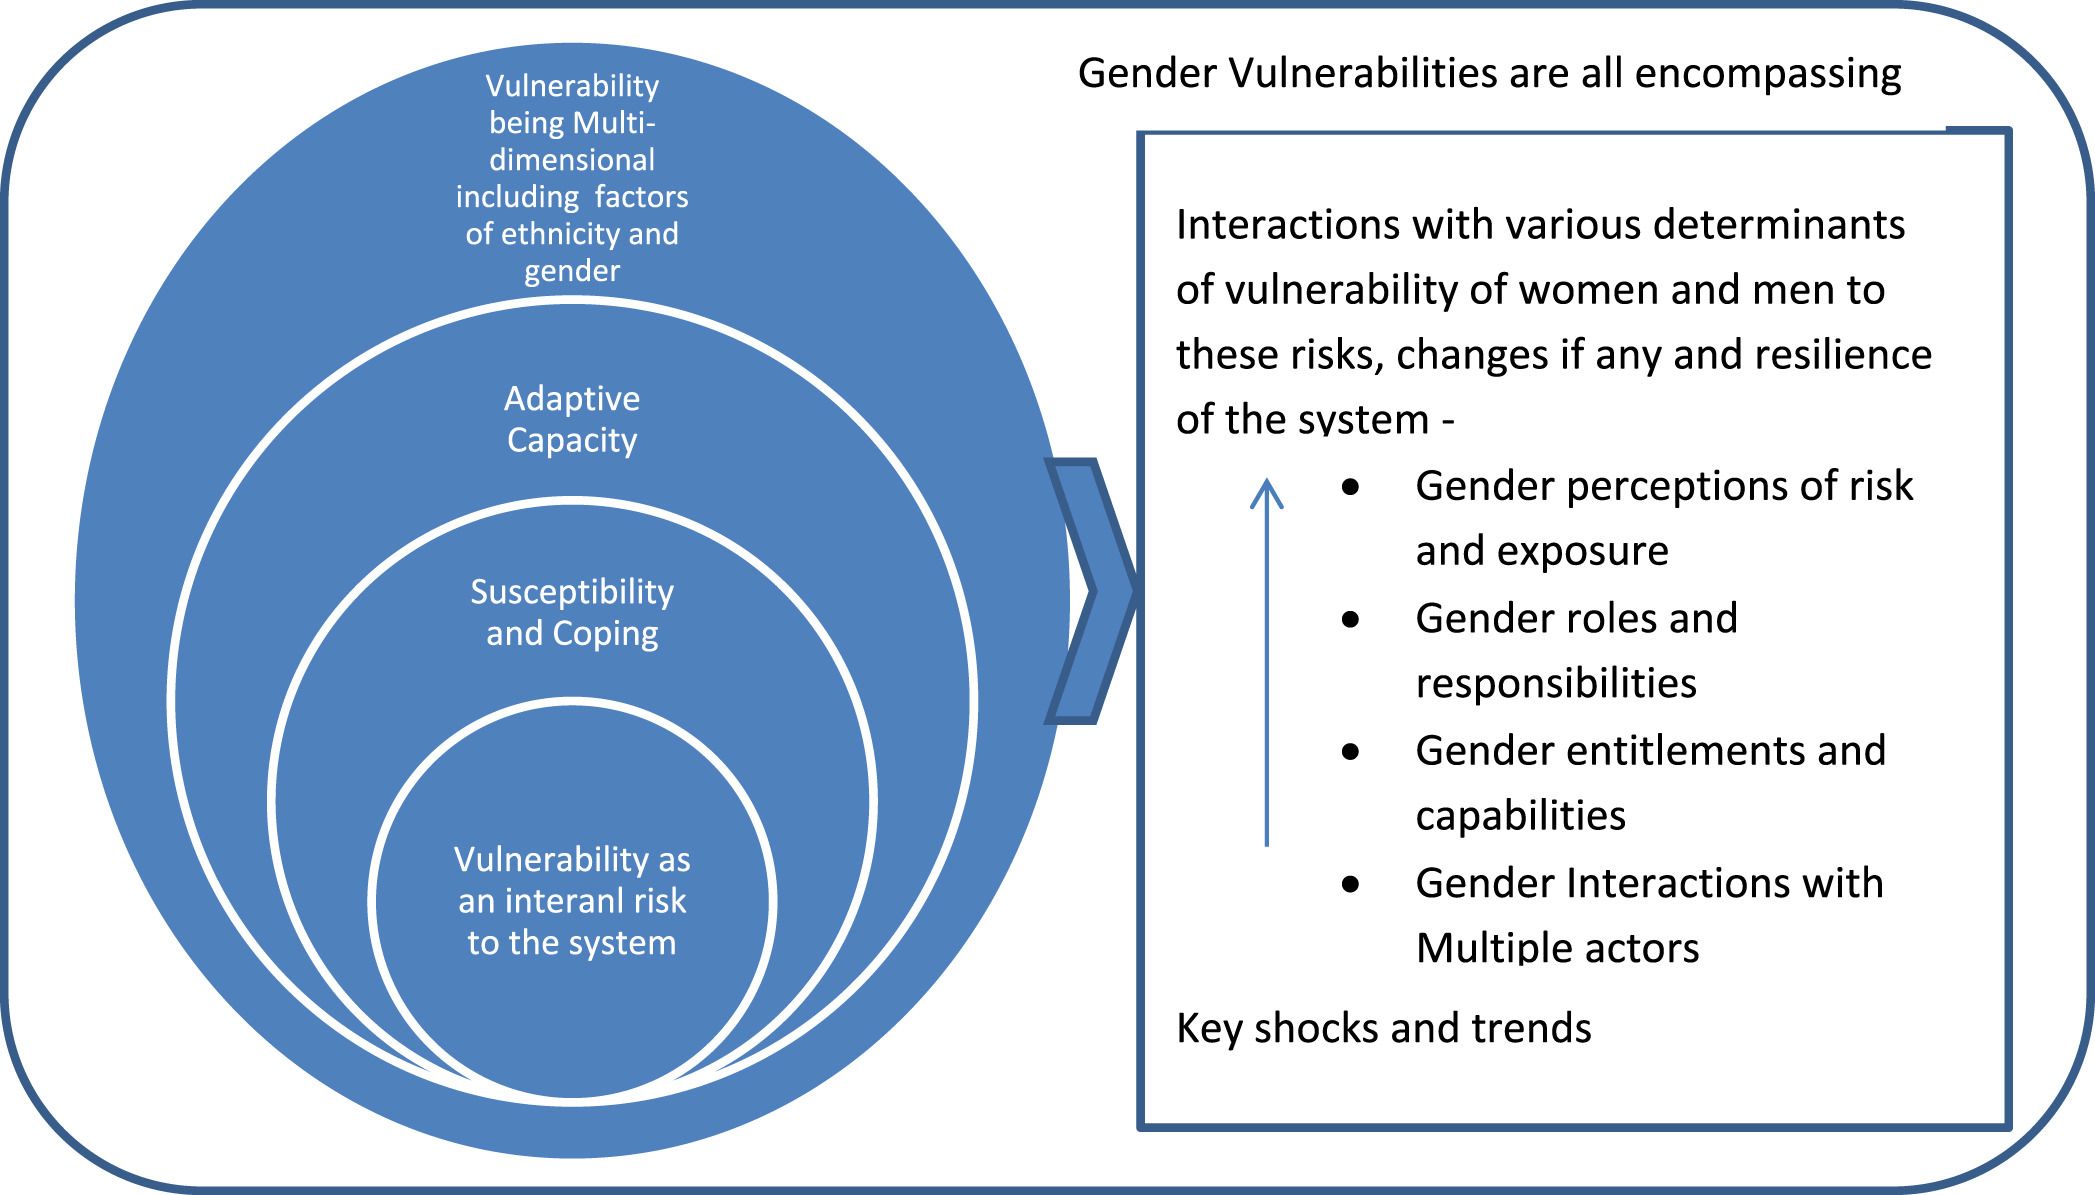 The concept of differential vulnerability i.e., vulnerability that can vary within and across groups is largely influenced by underlying and interlinked issues, is underexplored, especially in regions facing skewed development trends where the impacts magnify further. Gender plays a crucial part at this intersectionality of factors influencing a system's/individual's vulnerability.  